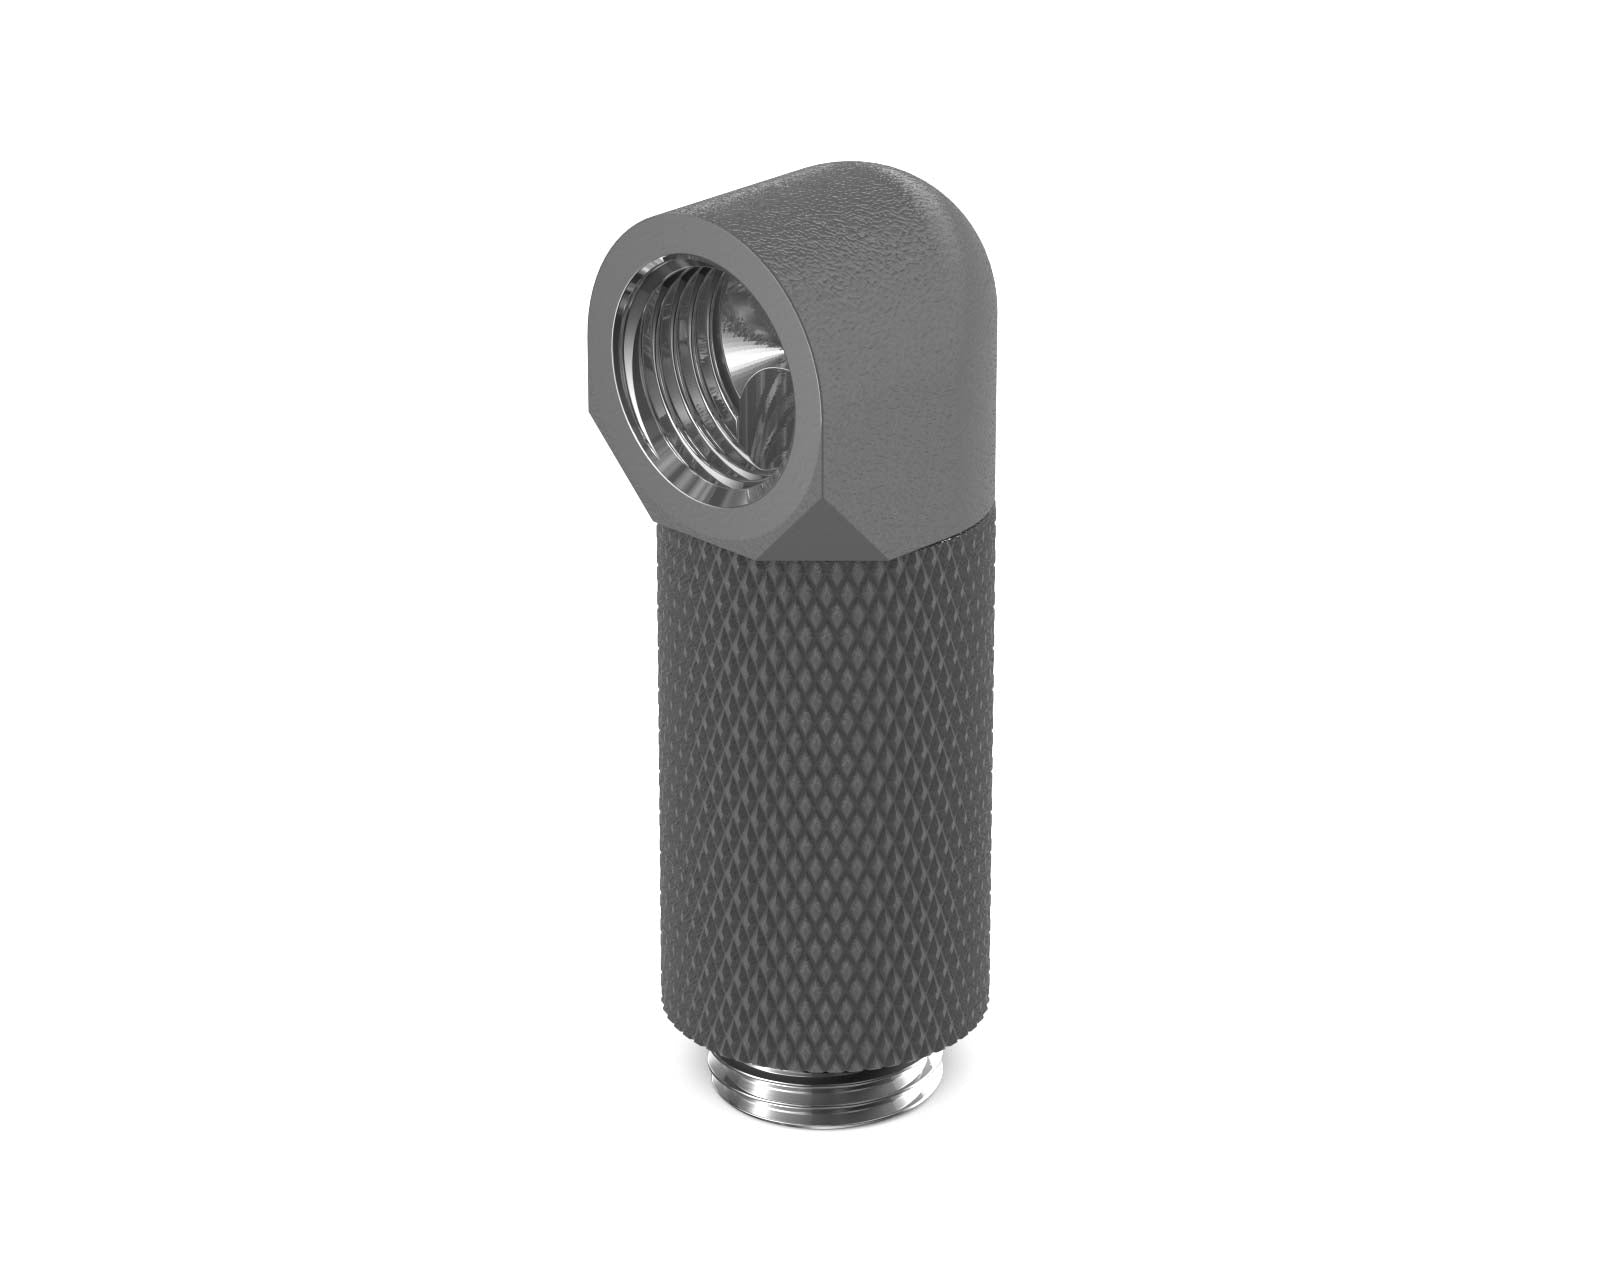 PrimoChill Male to Female G 1/4in. 90 Degree SX Rotary 30mm Extension Elbow Fitting - PrimoChill - KEEPING IT COOL TX Matte Gun Metal